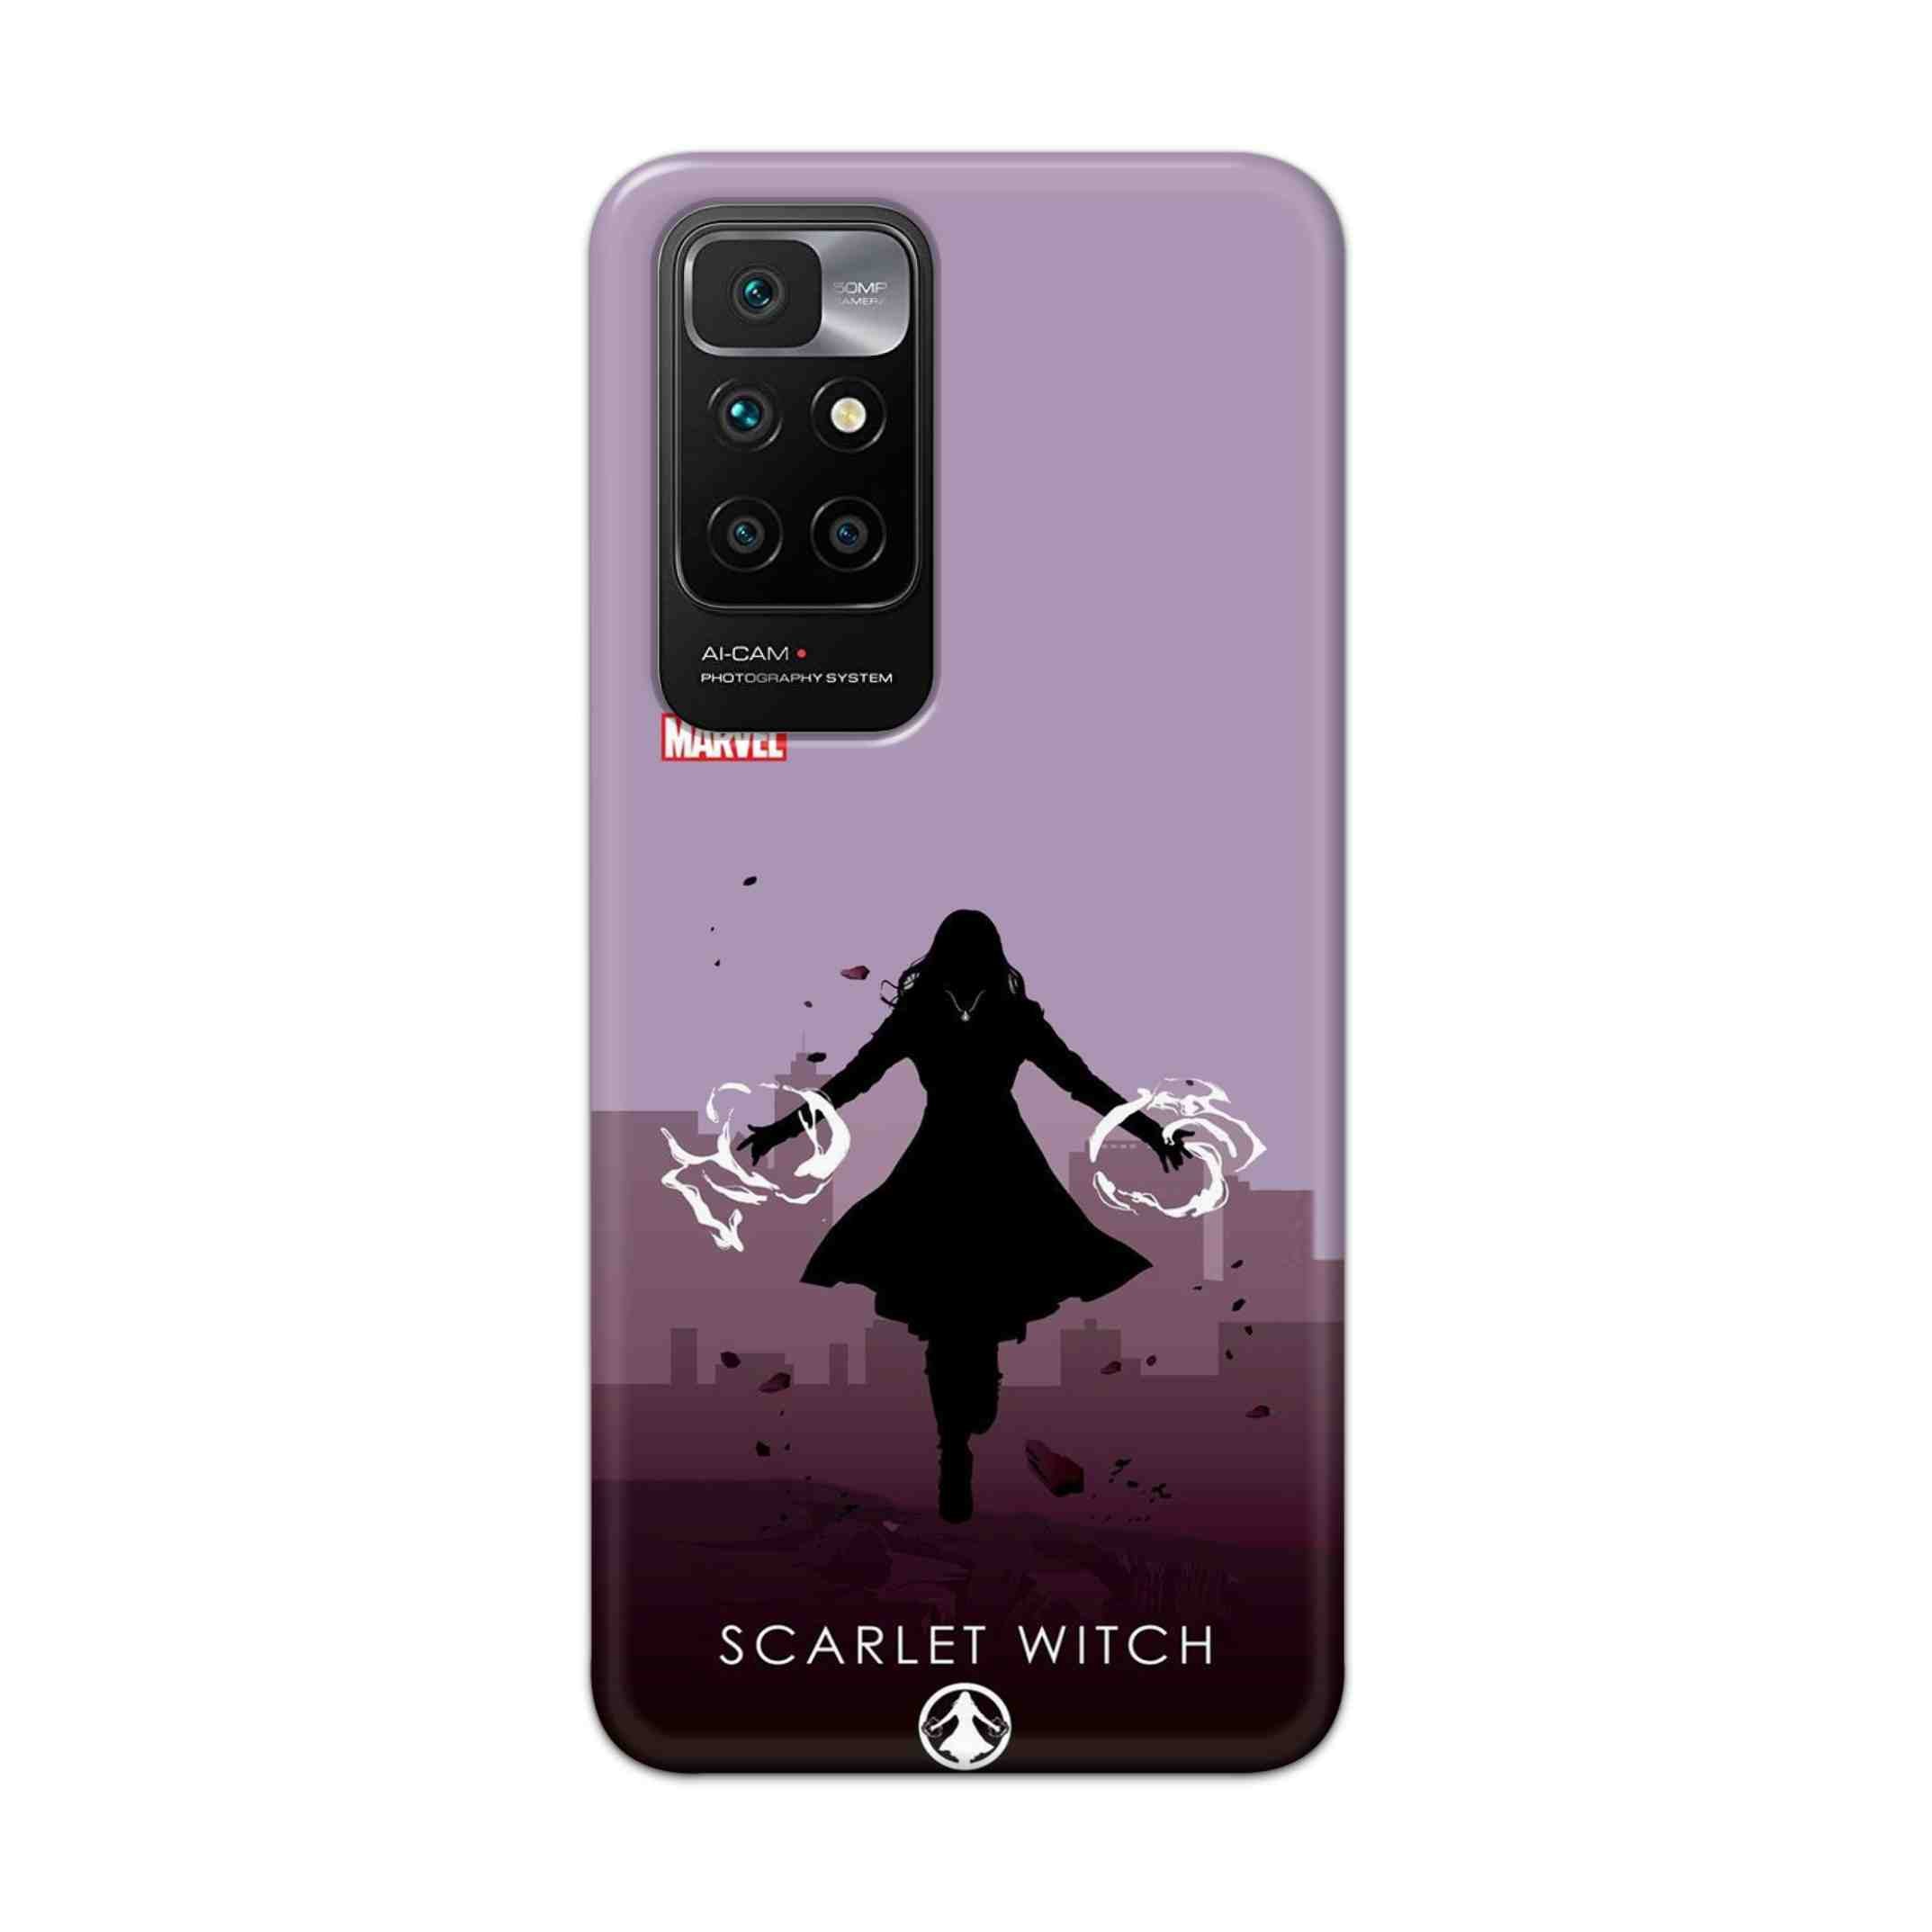 Buy Scarlet Witch Hard Back Mobile Phone Case Cover For Redmi 10 Prime Online